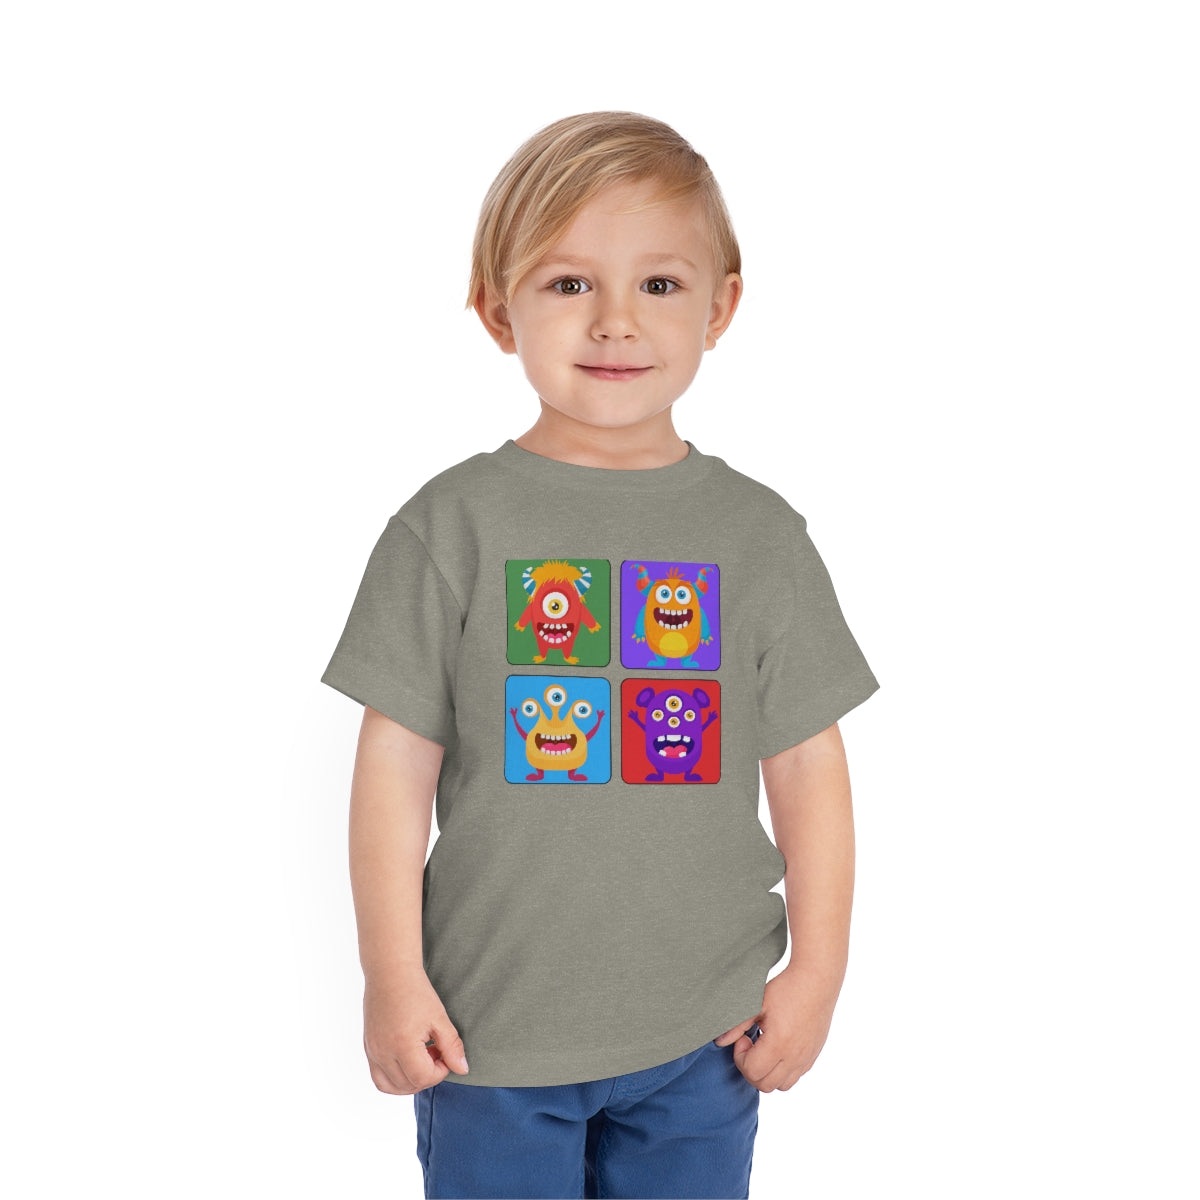 Educational, interactive Childrens' clothes that make every morning a teachable moment. Featuring a variety of characters, numbers, patterns, colors and shapes these t-shirts for your kiddo will make getting dress engaging and fun